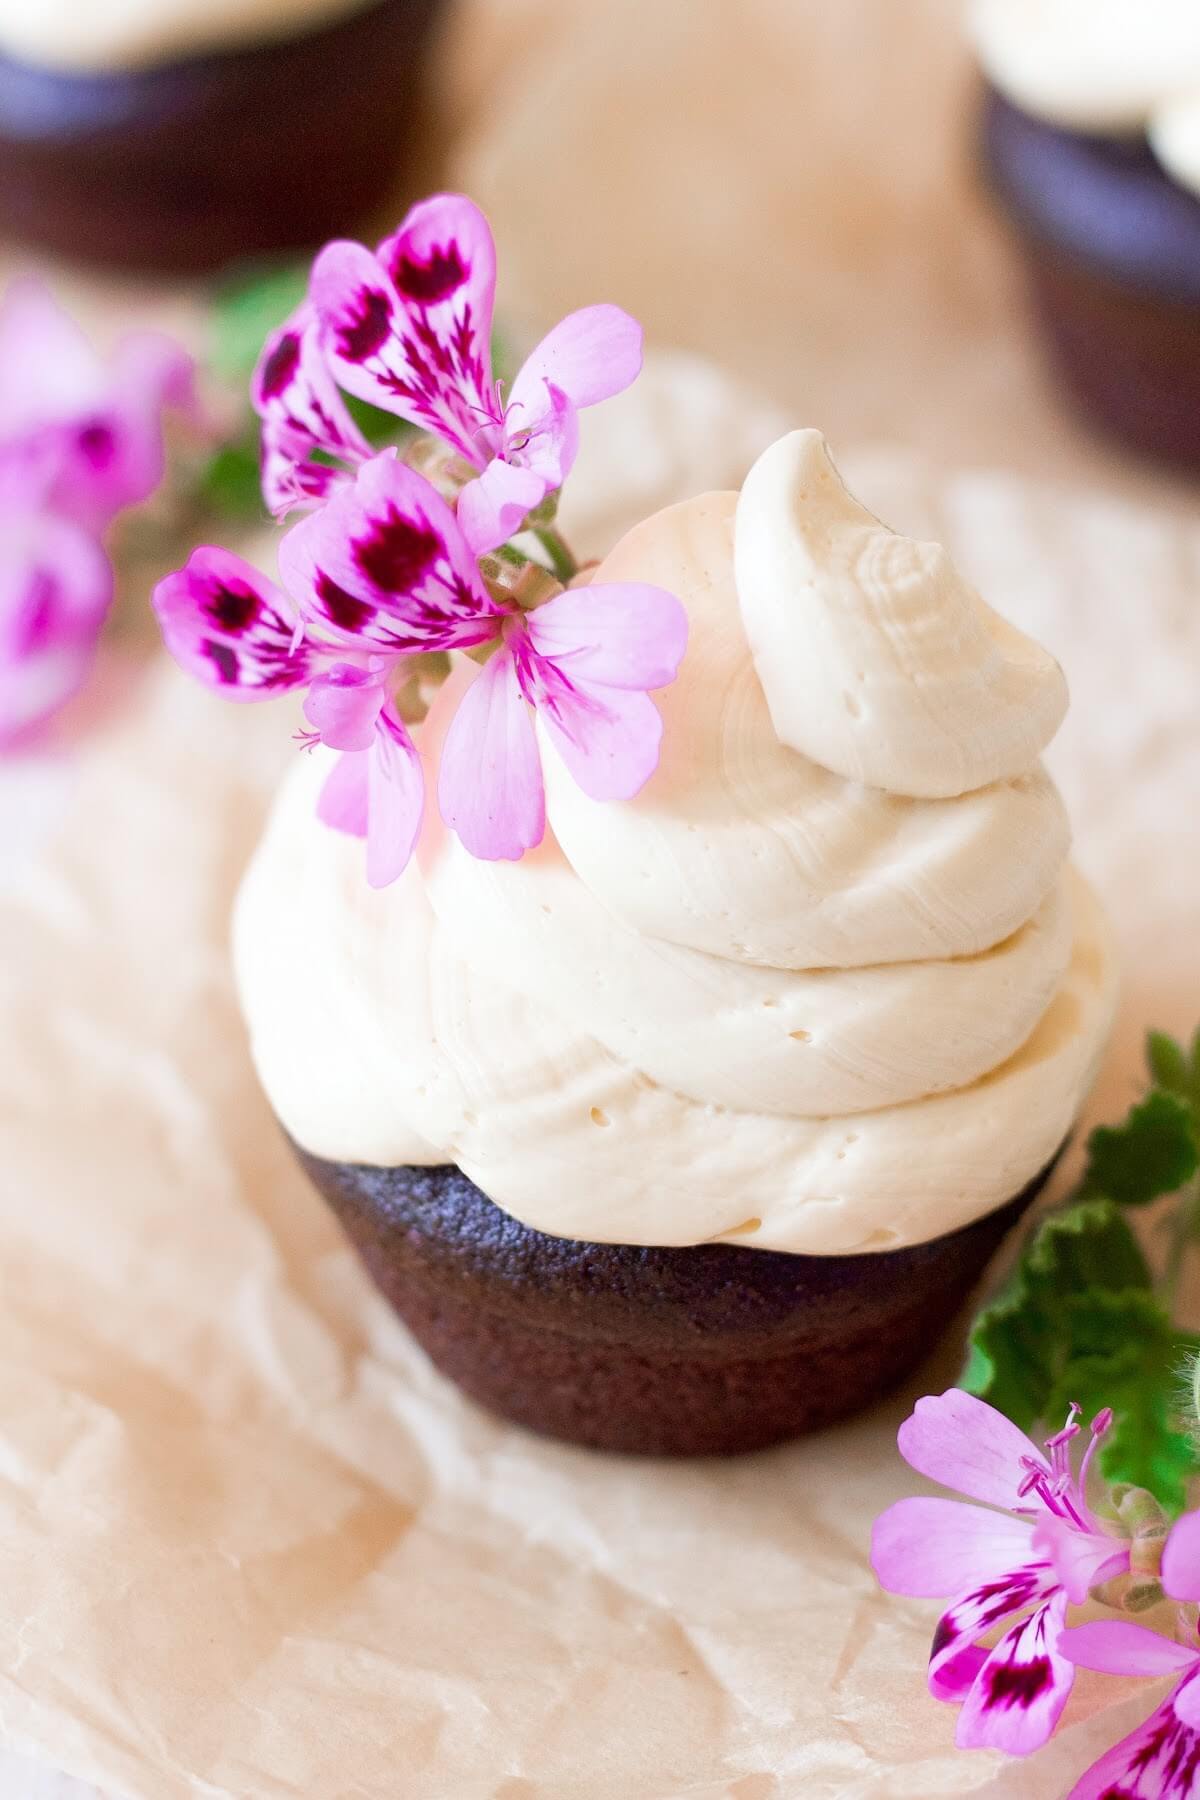 Chocolate cupcake topped with a 2-inch swirl of vanilla buttercream frosting and pink geranium flowers for garnish sitting on top of a square piece of unbleached parchment paper and two vanilla frosted cupcakes in the background.